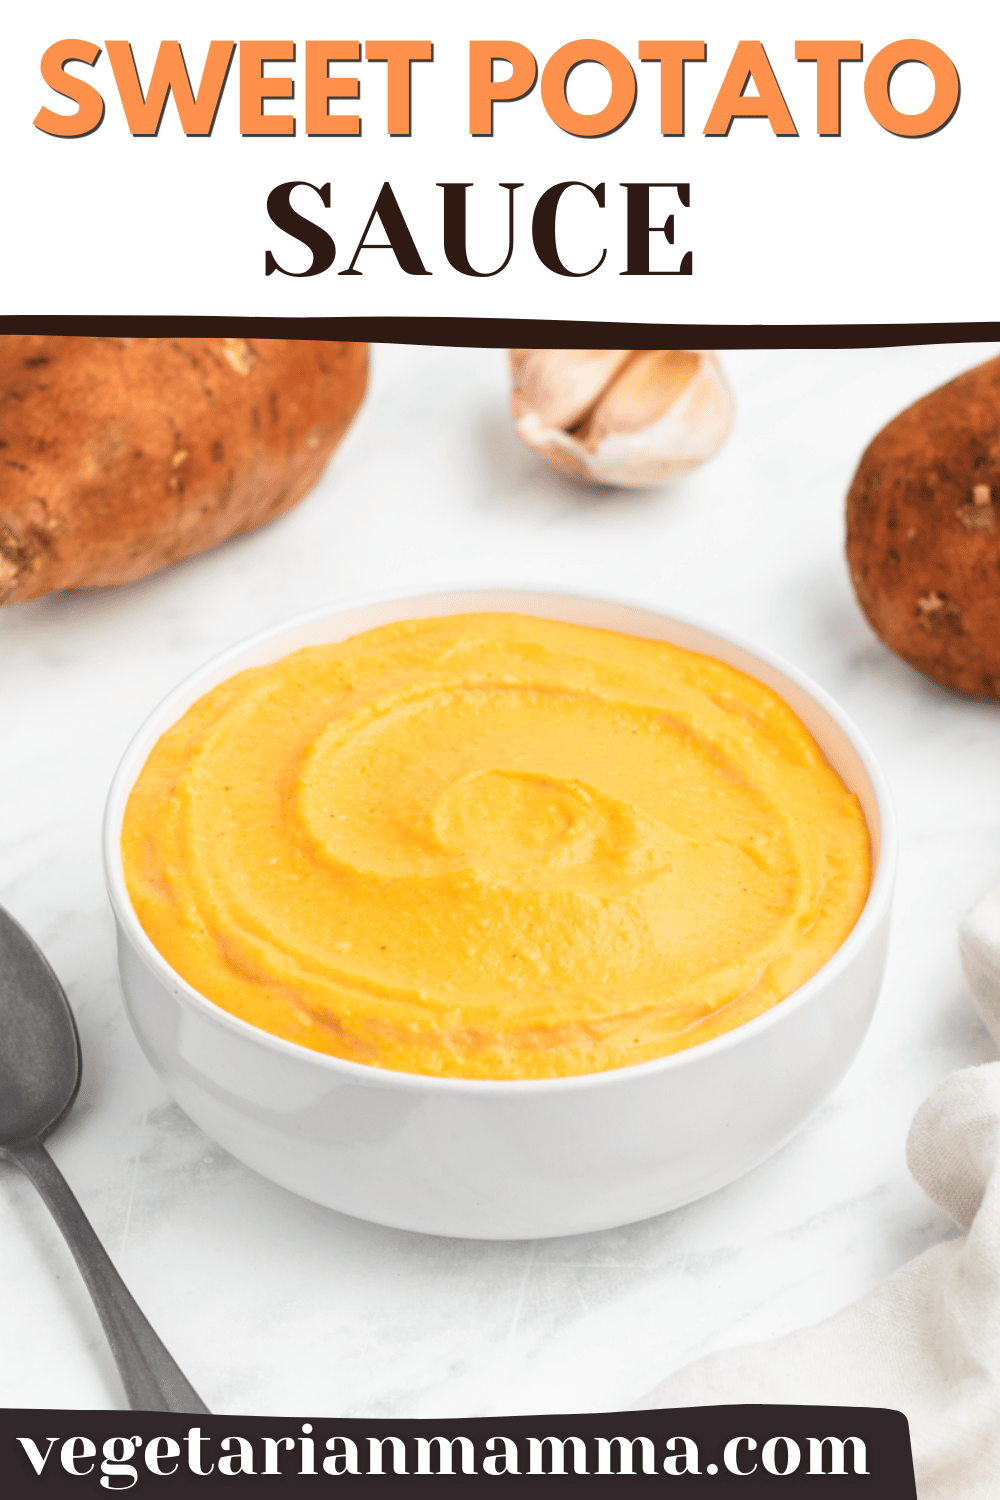 A creamy and flavorful Sweet Potato Sauce is so easy to make in the food processor or blender! It's perfect with pasta, as a dip with pita bread or veggies, or mixed into your favorite recipes in new and different ways.